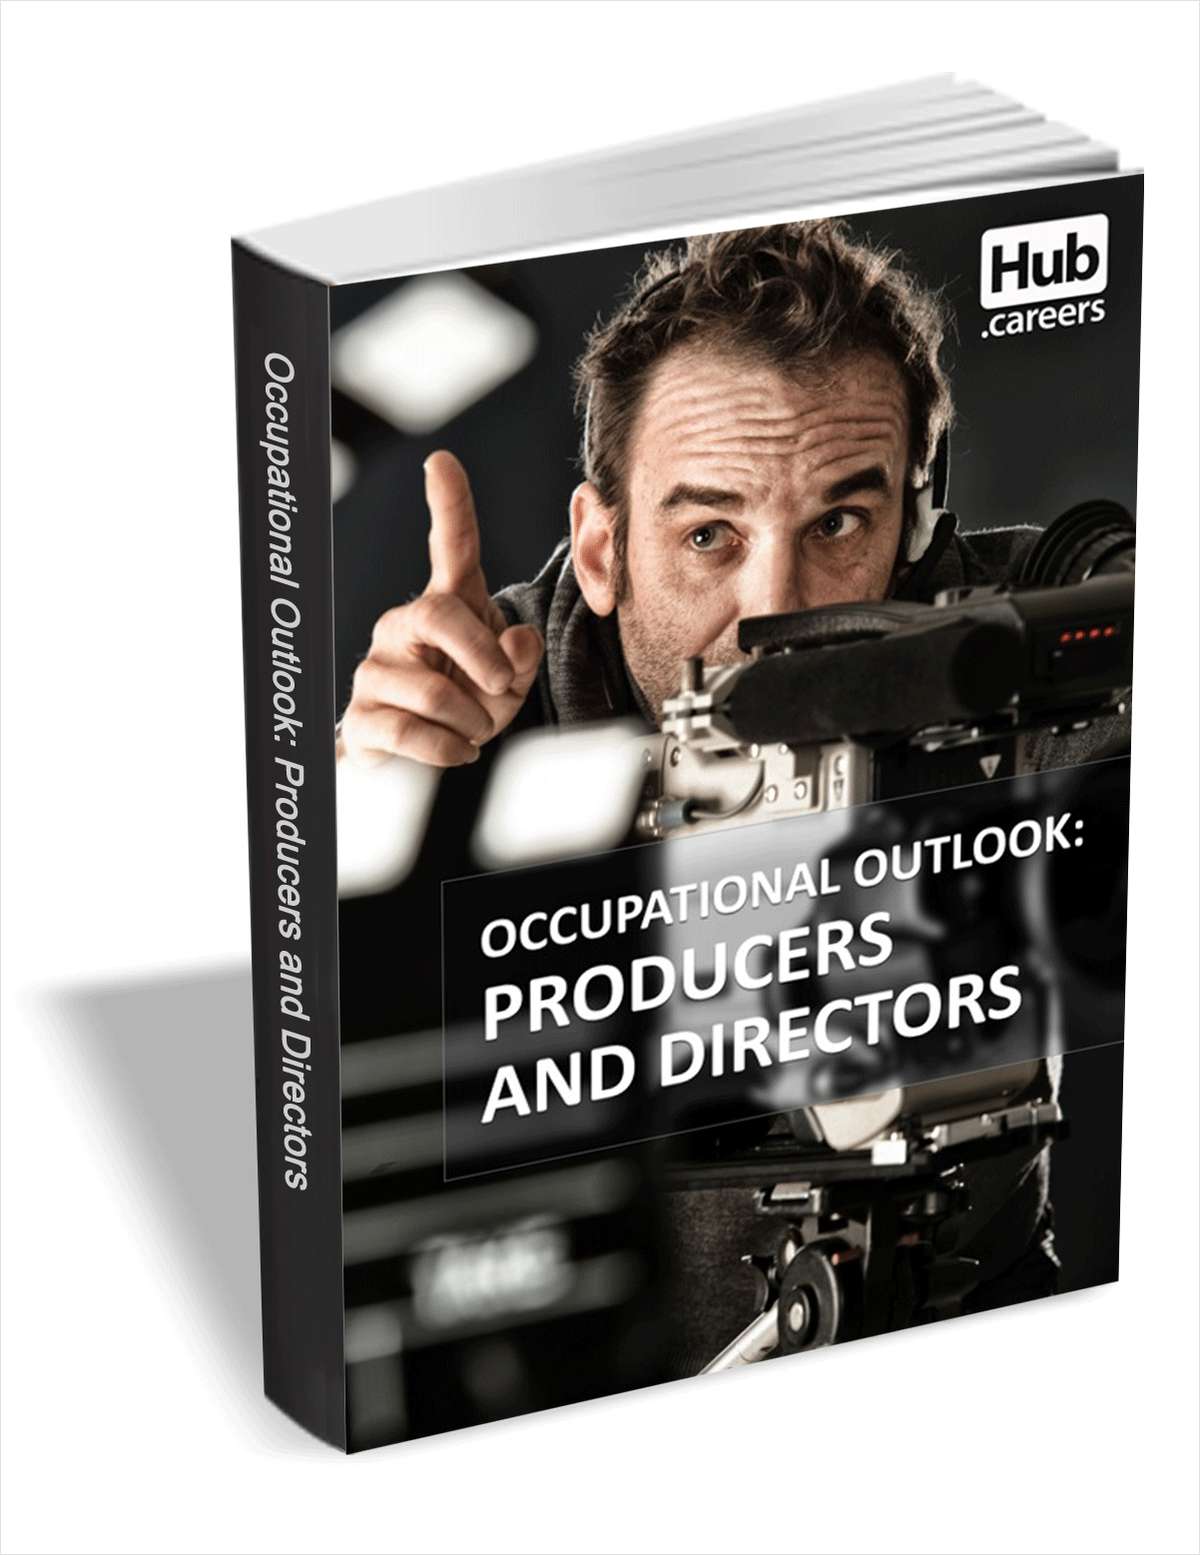 Producers and Directors - Occupational Outlook